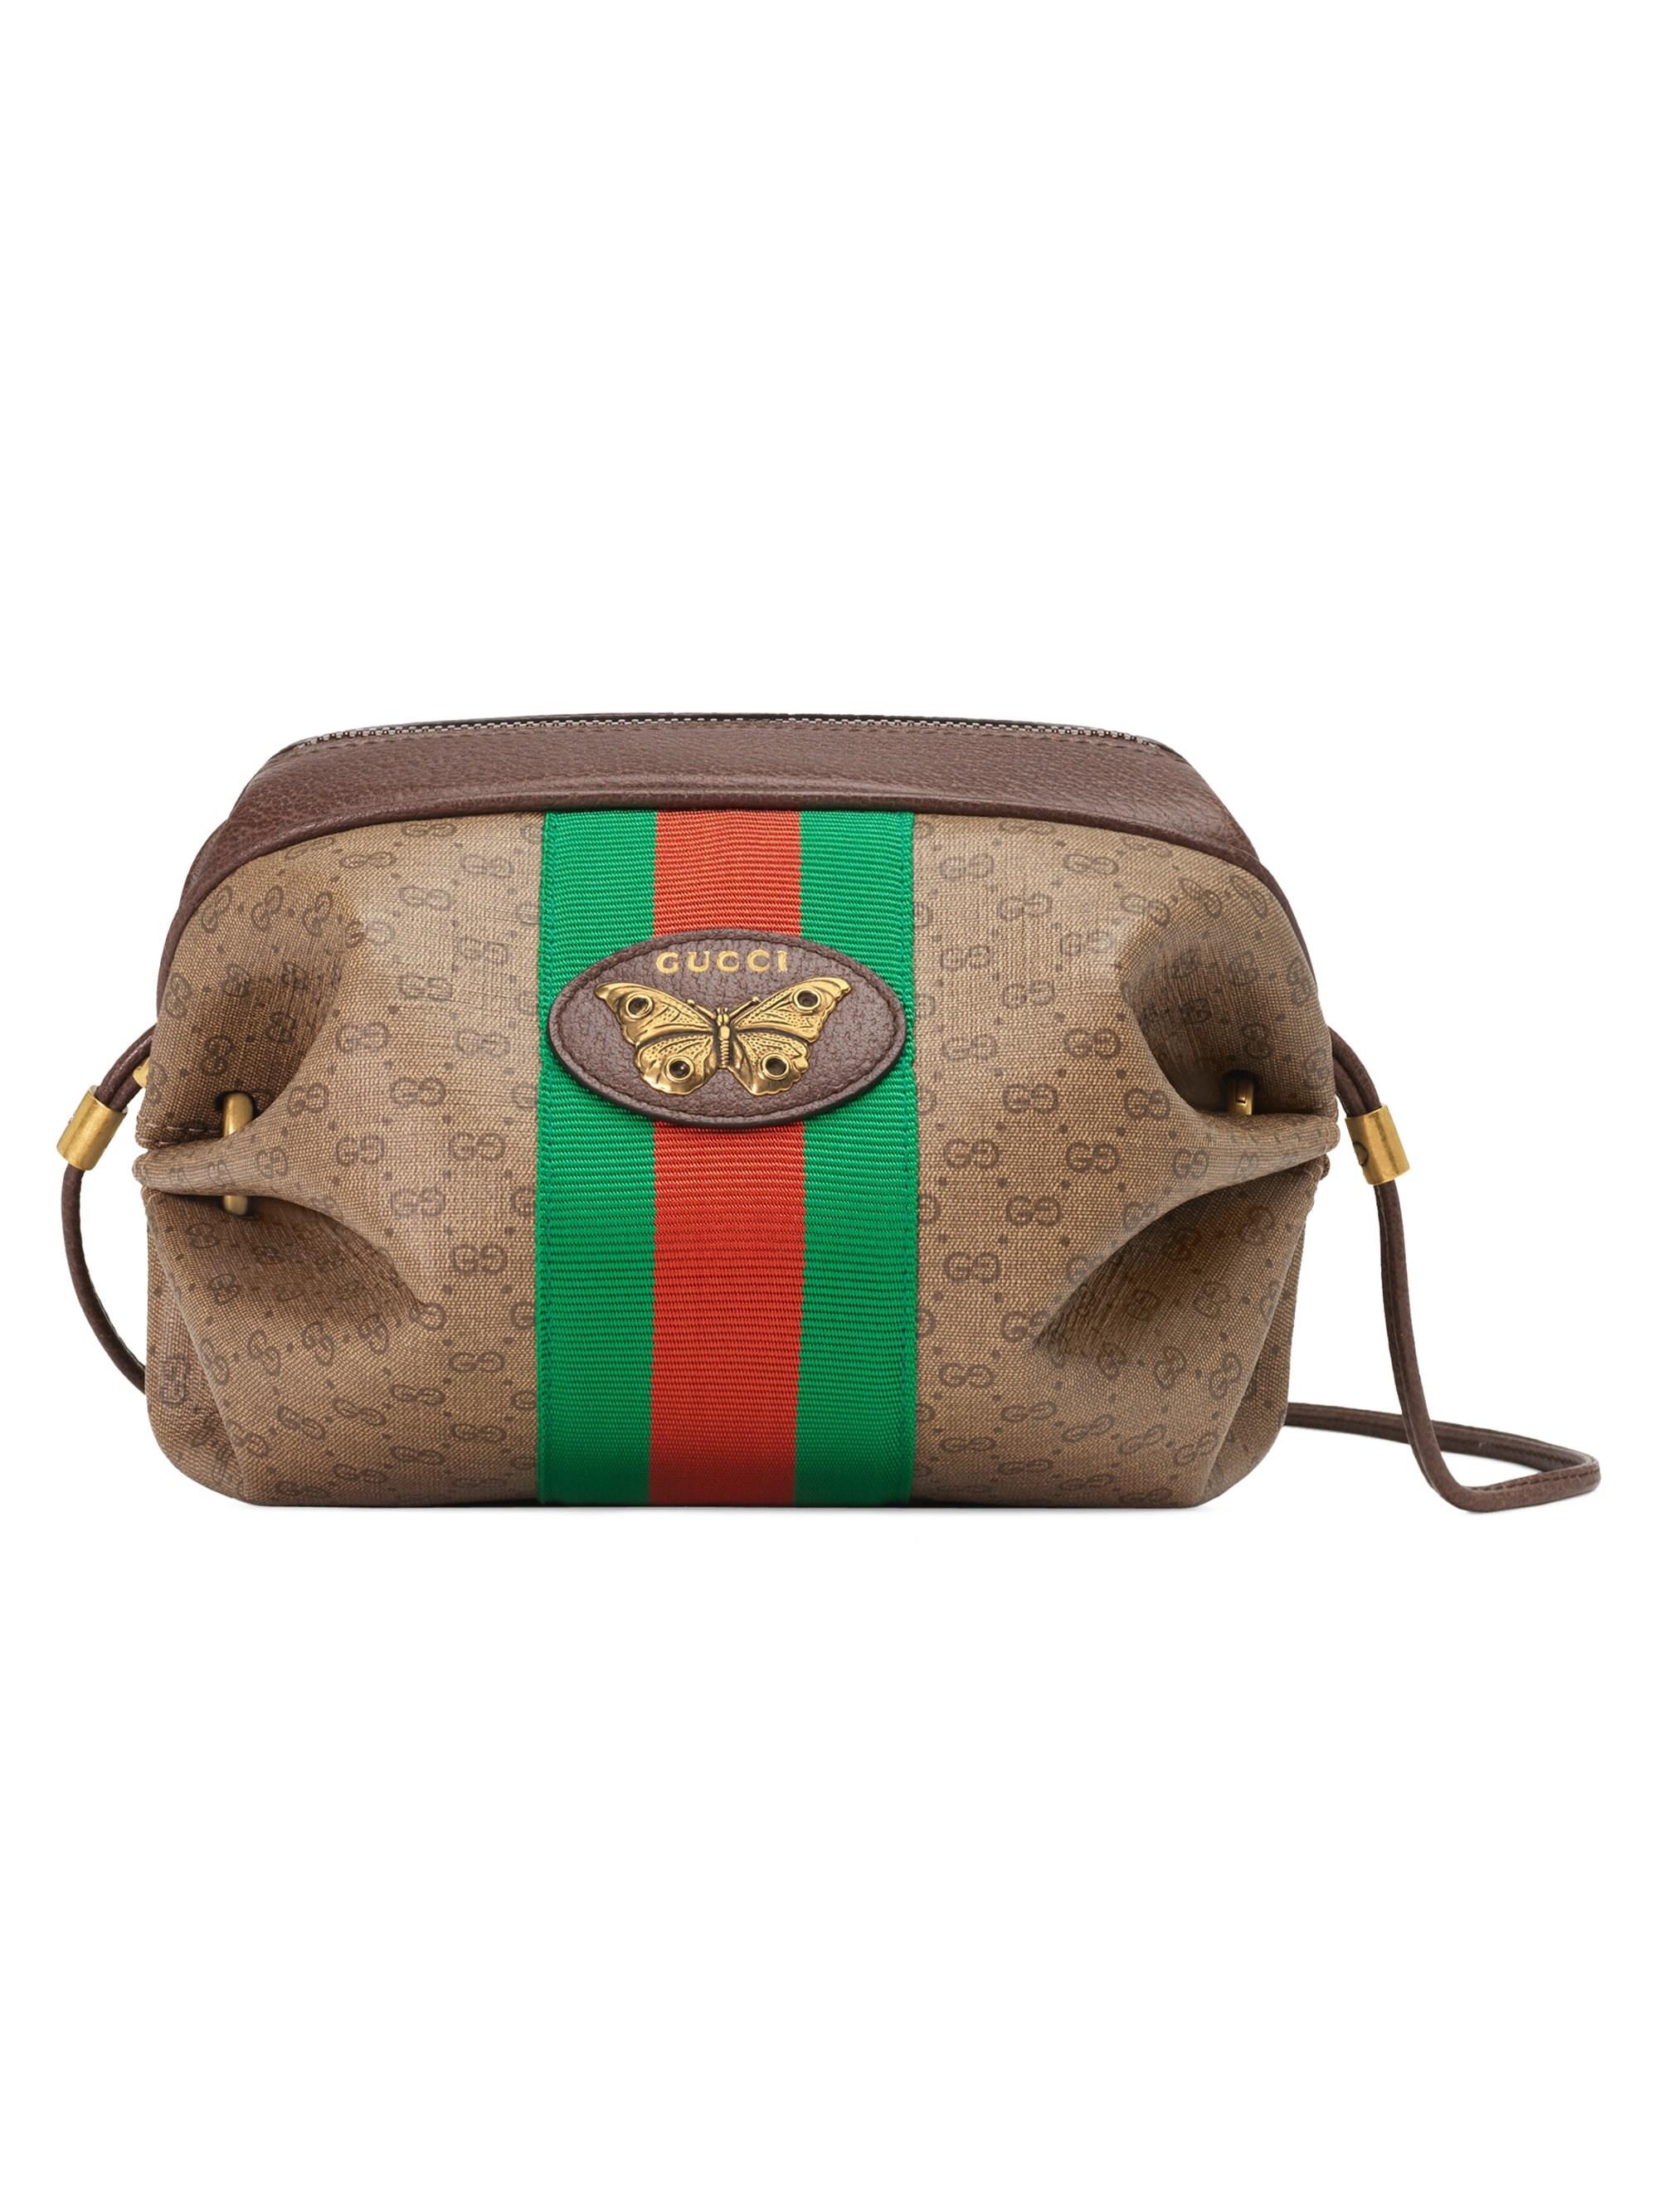 gucci candy bags